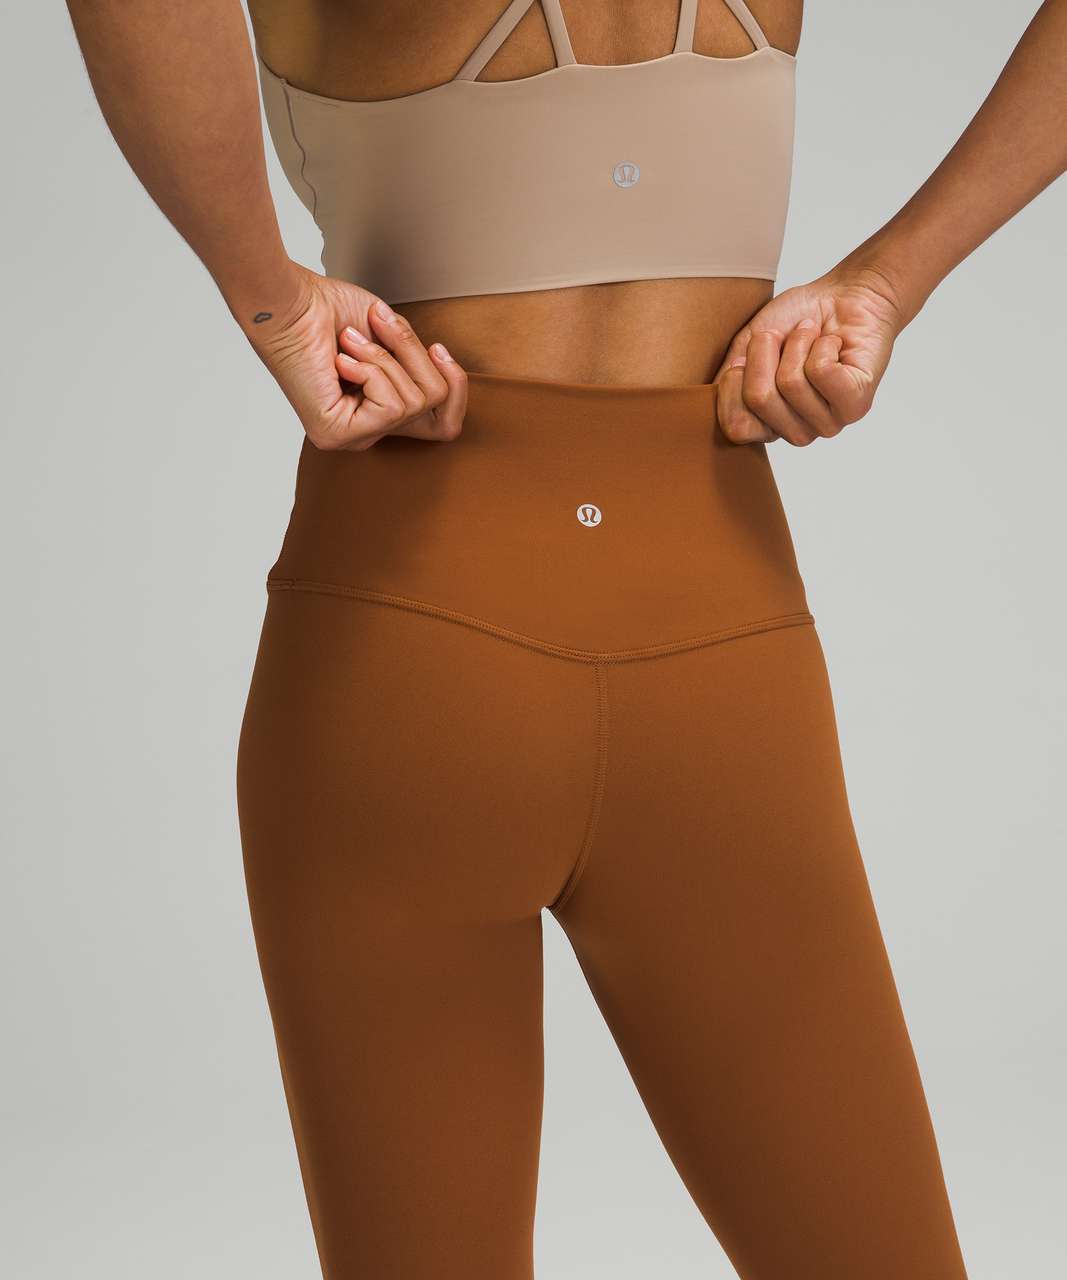 Lululemon ☆Align high rise Pant 21” in Copper Brown size 8 Leggings  Authentic